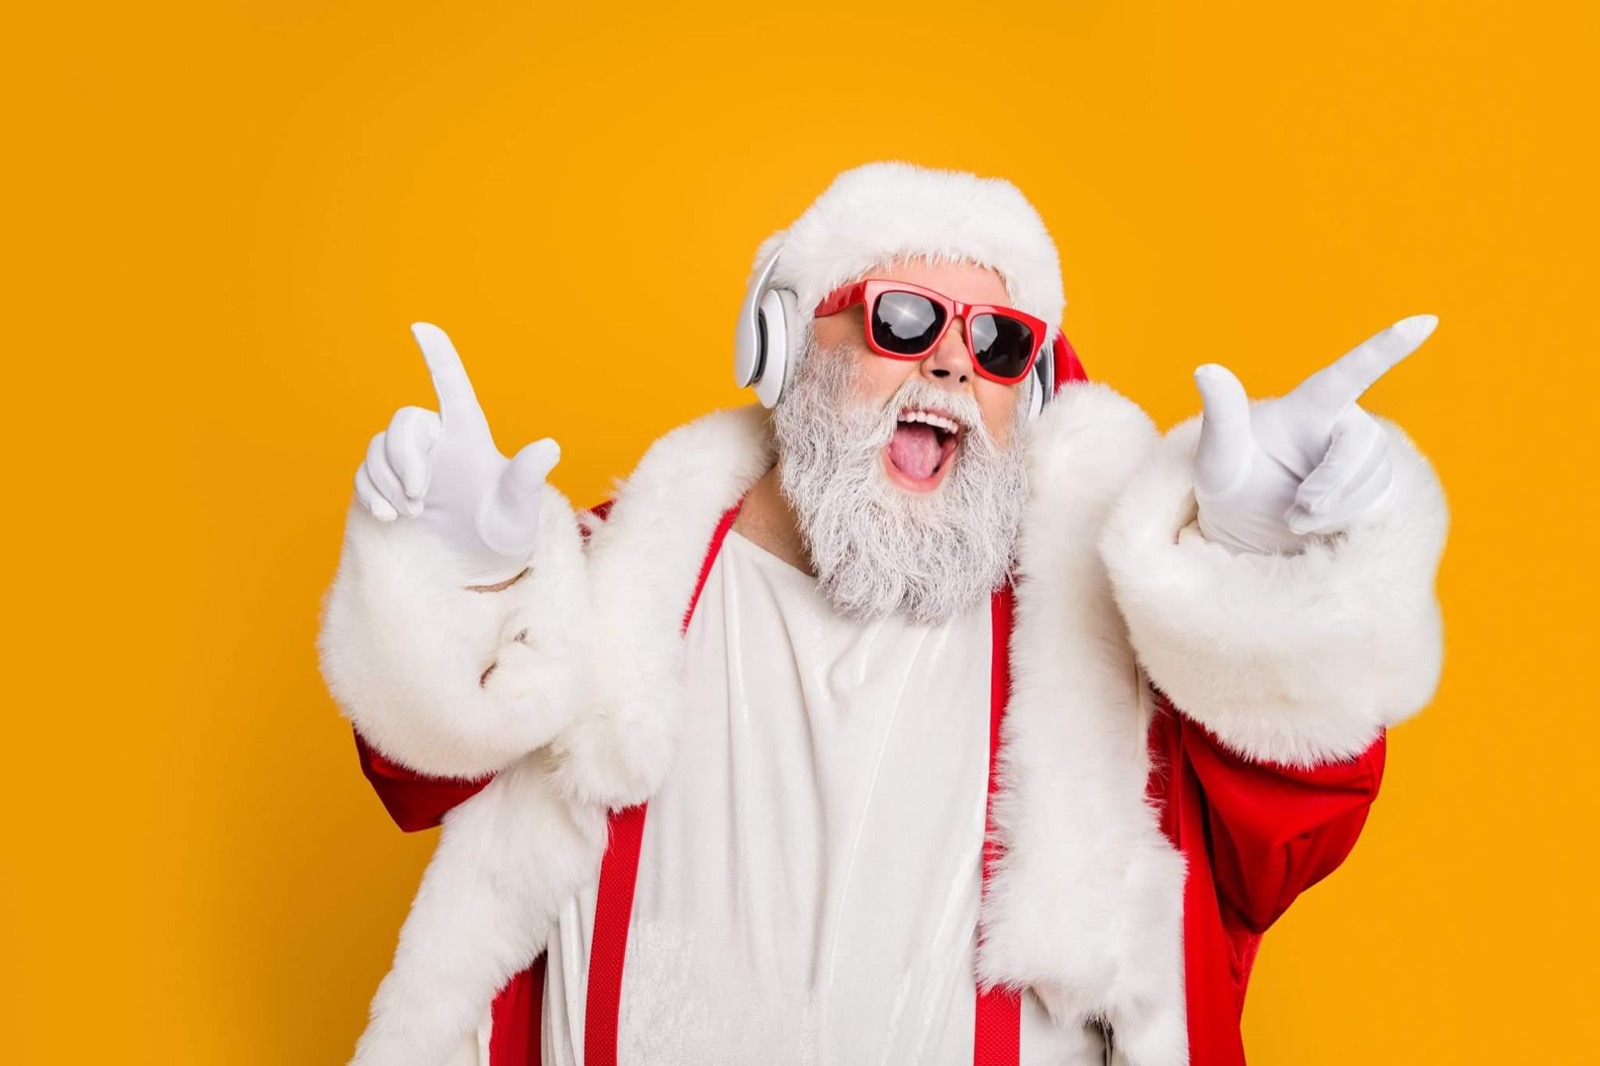 You got 12 out of 20! Tis the Season for Music! Can You Sleigh Our Ultimate Christmas Song Trivia Quiz?